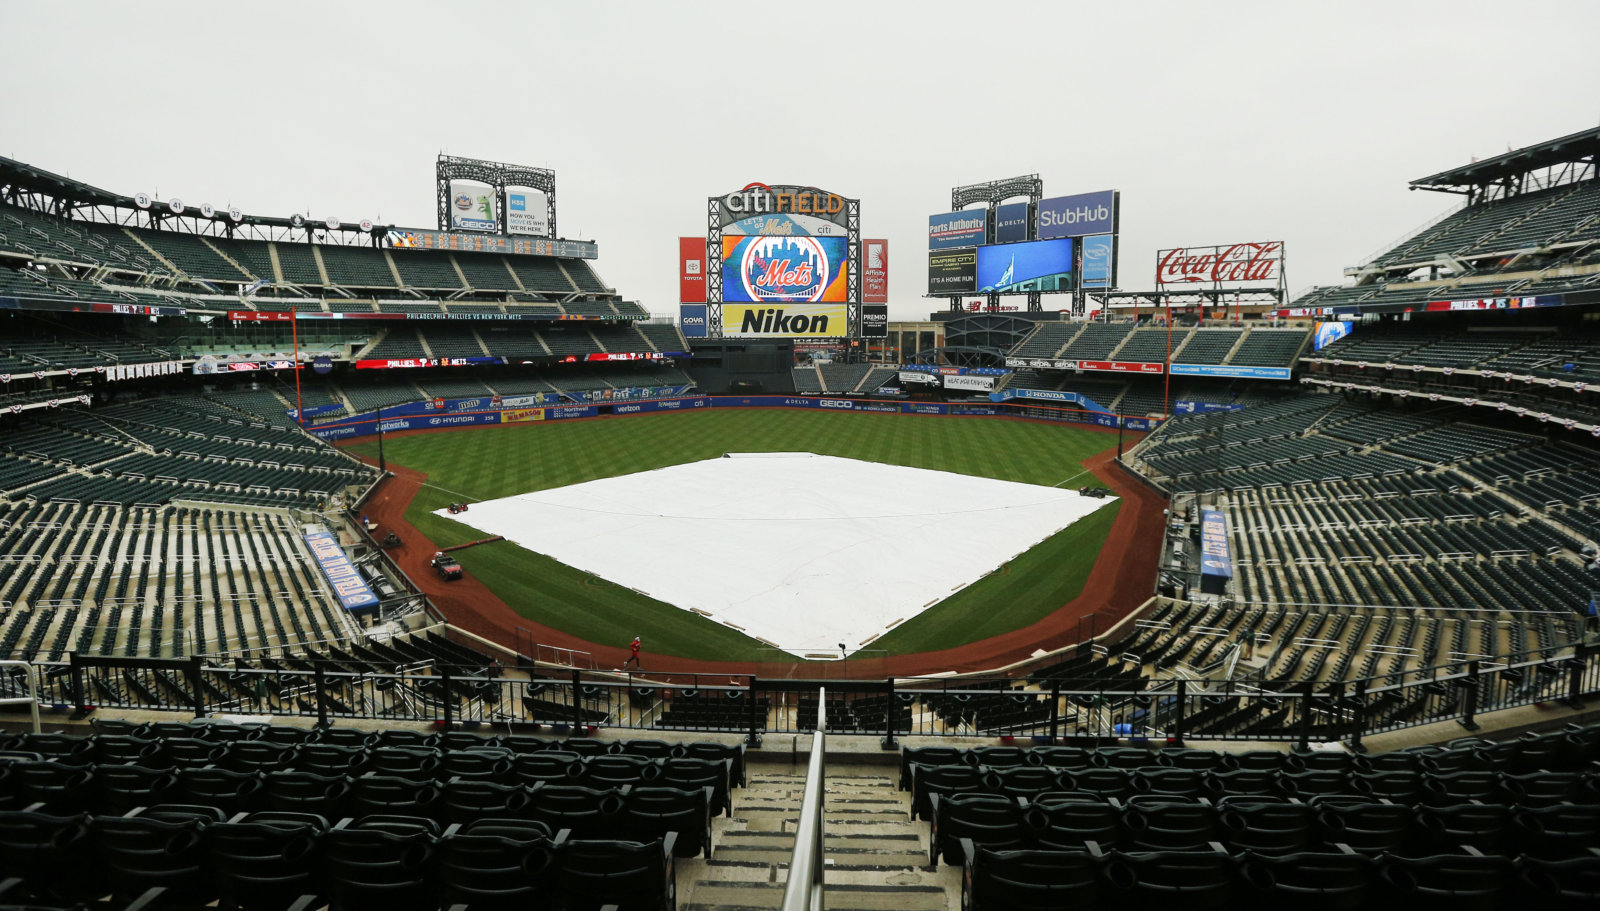 Another wash Thursday’s Mets, Phillies game rained out amNewYork